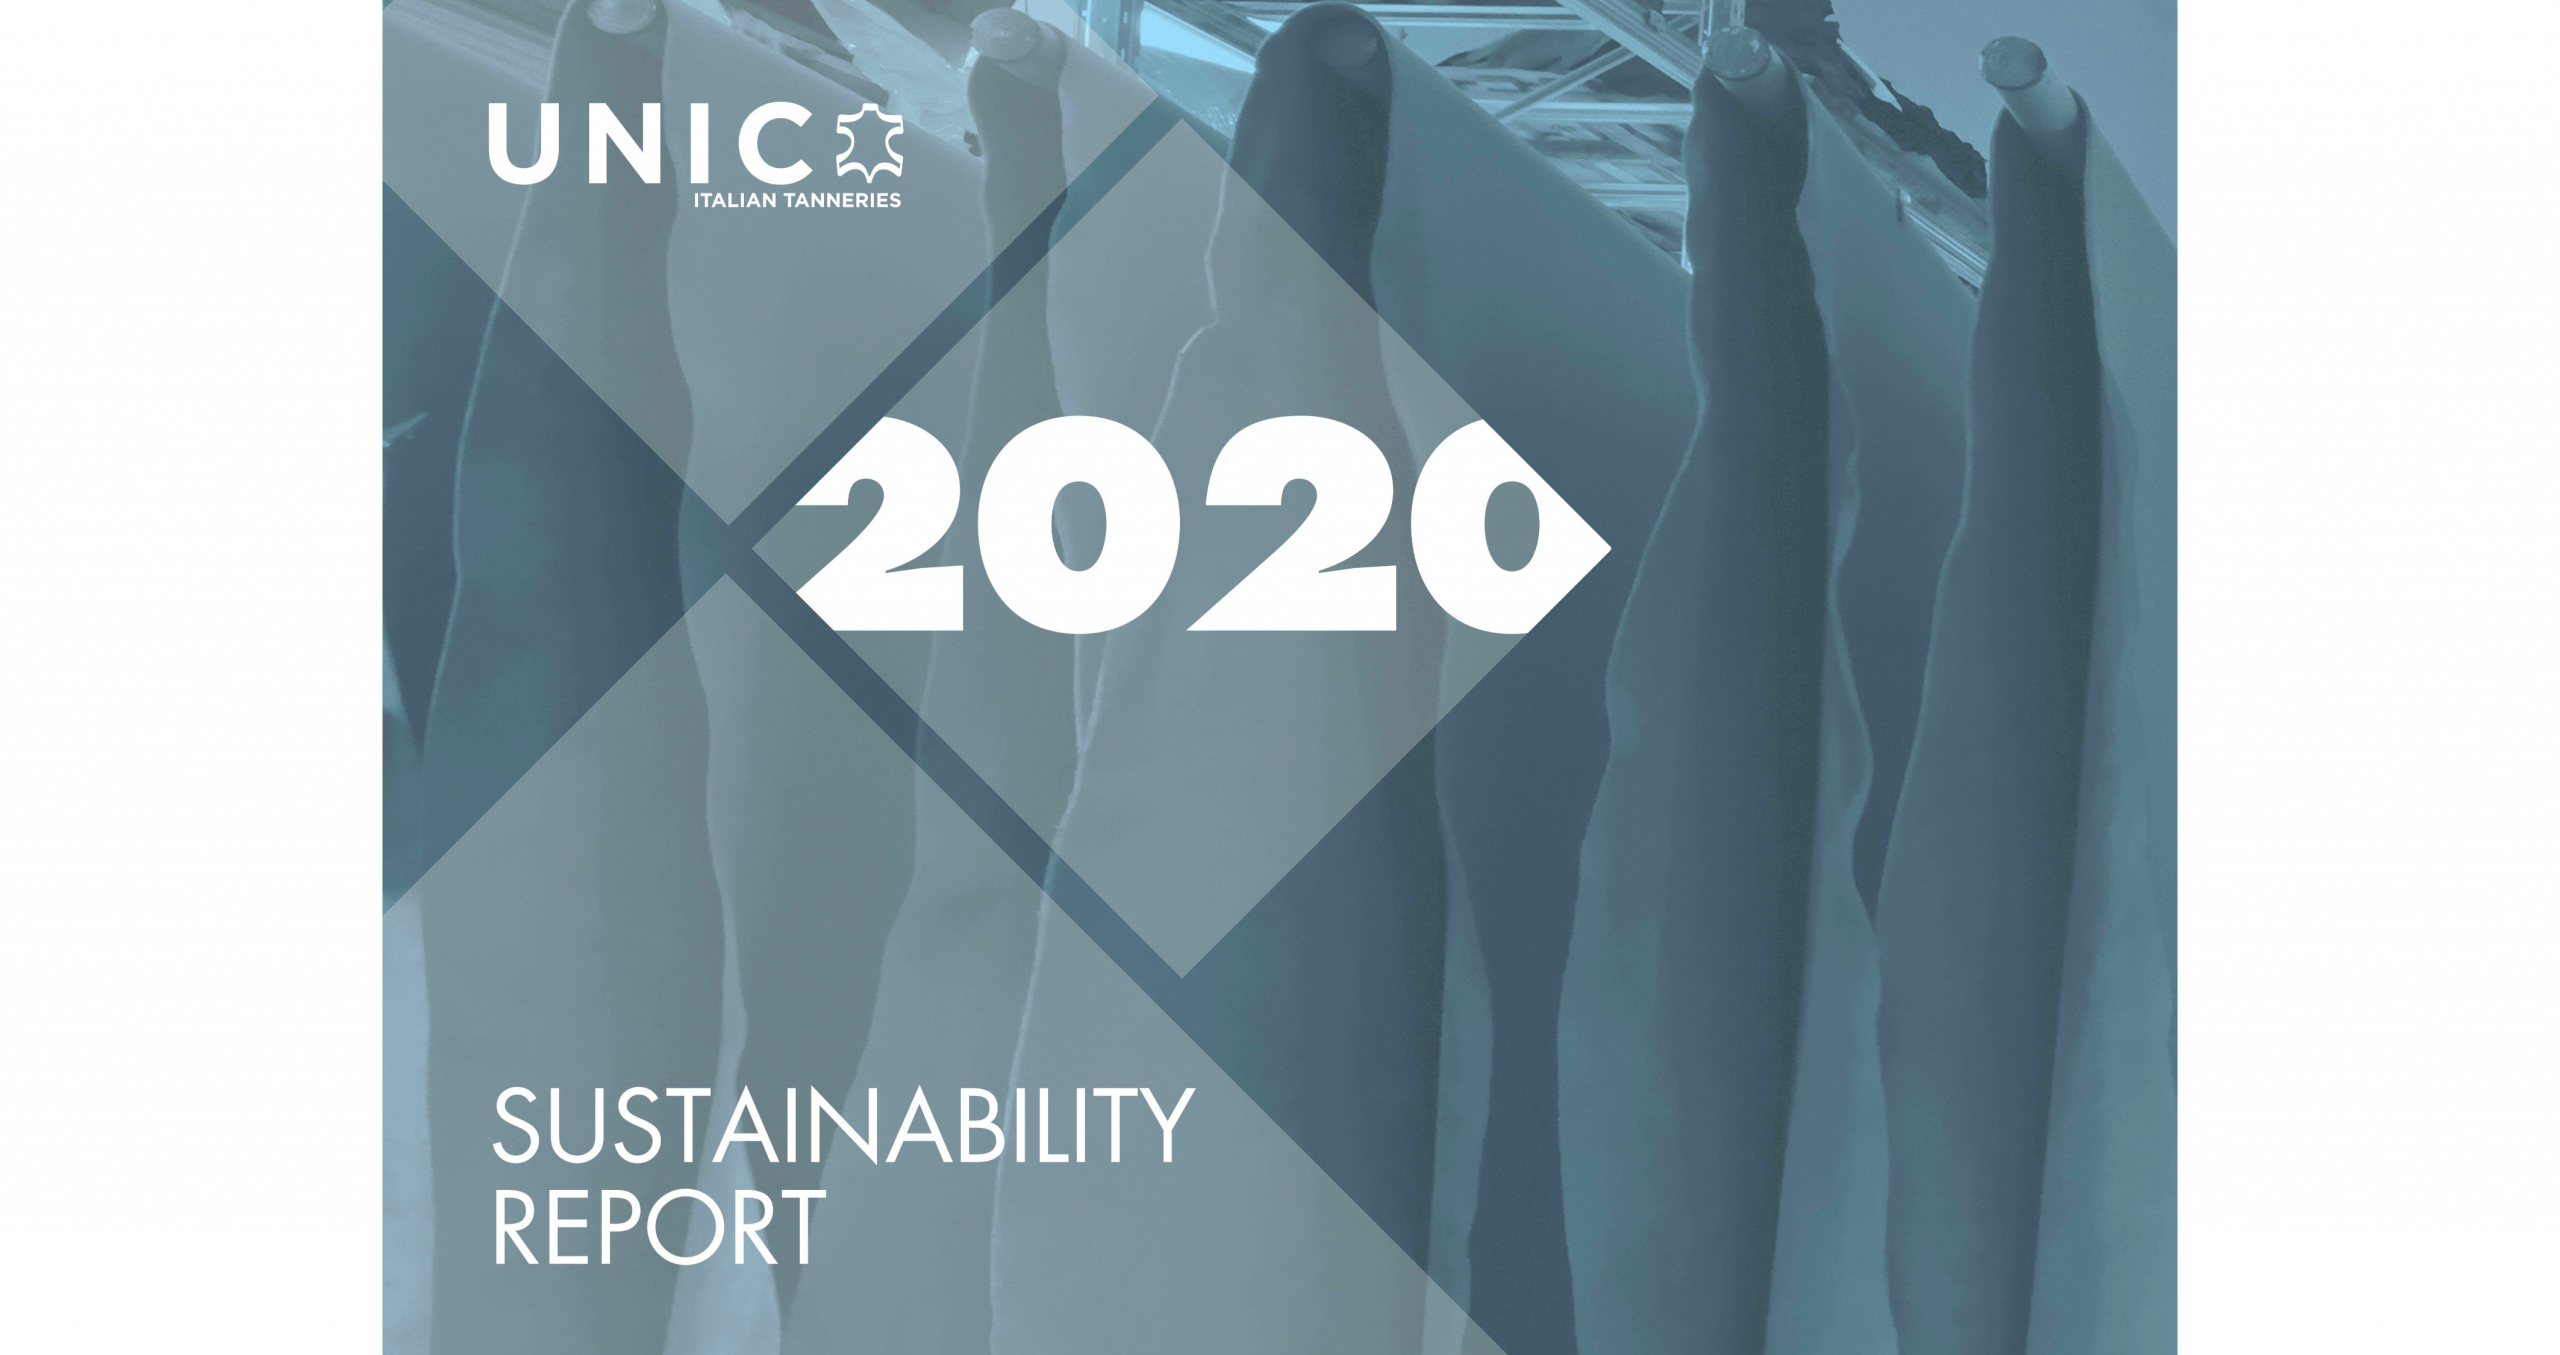 Sustainability report 2020 of the Italian leather industry